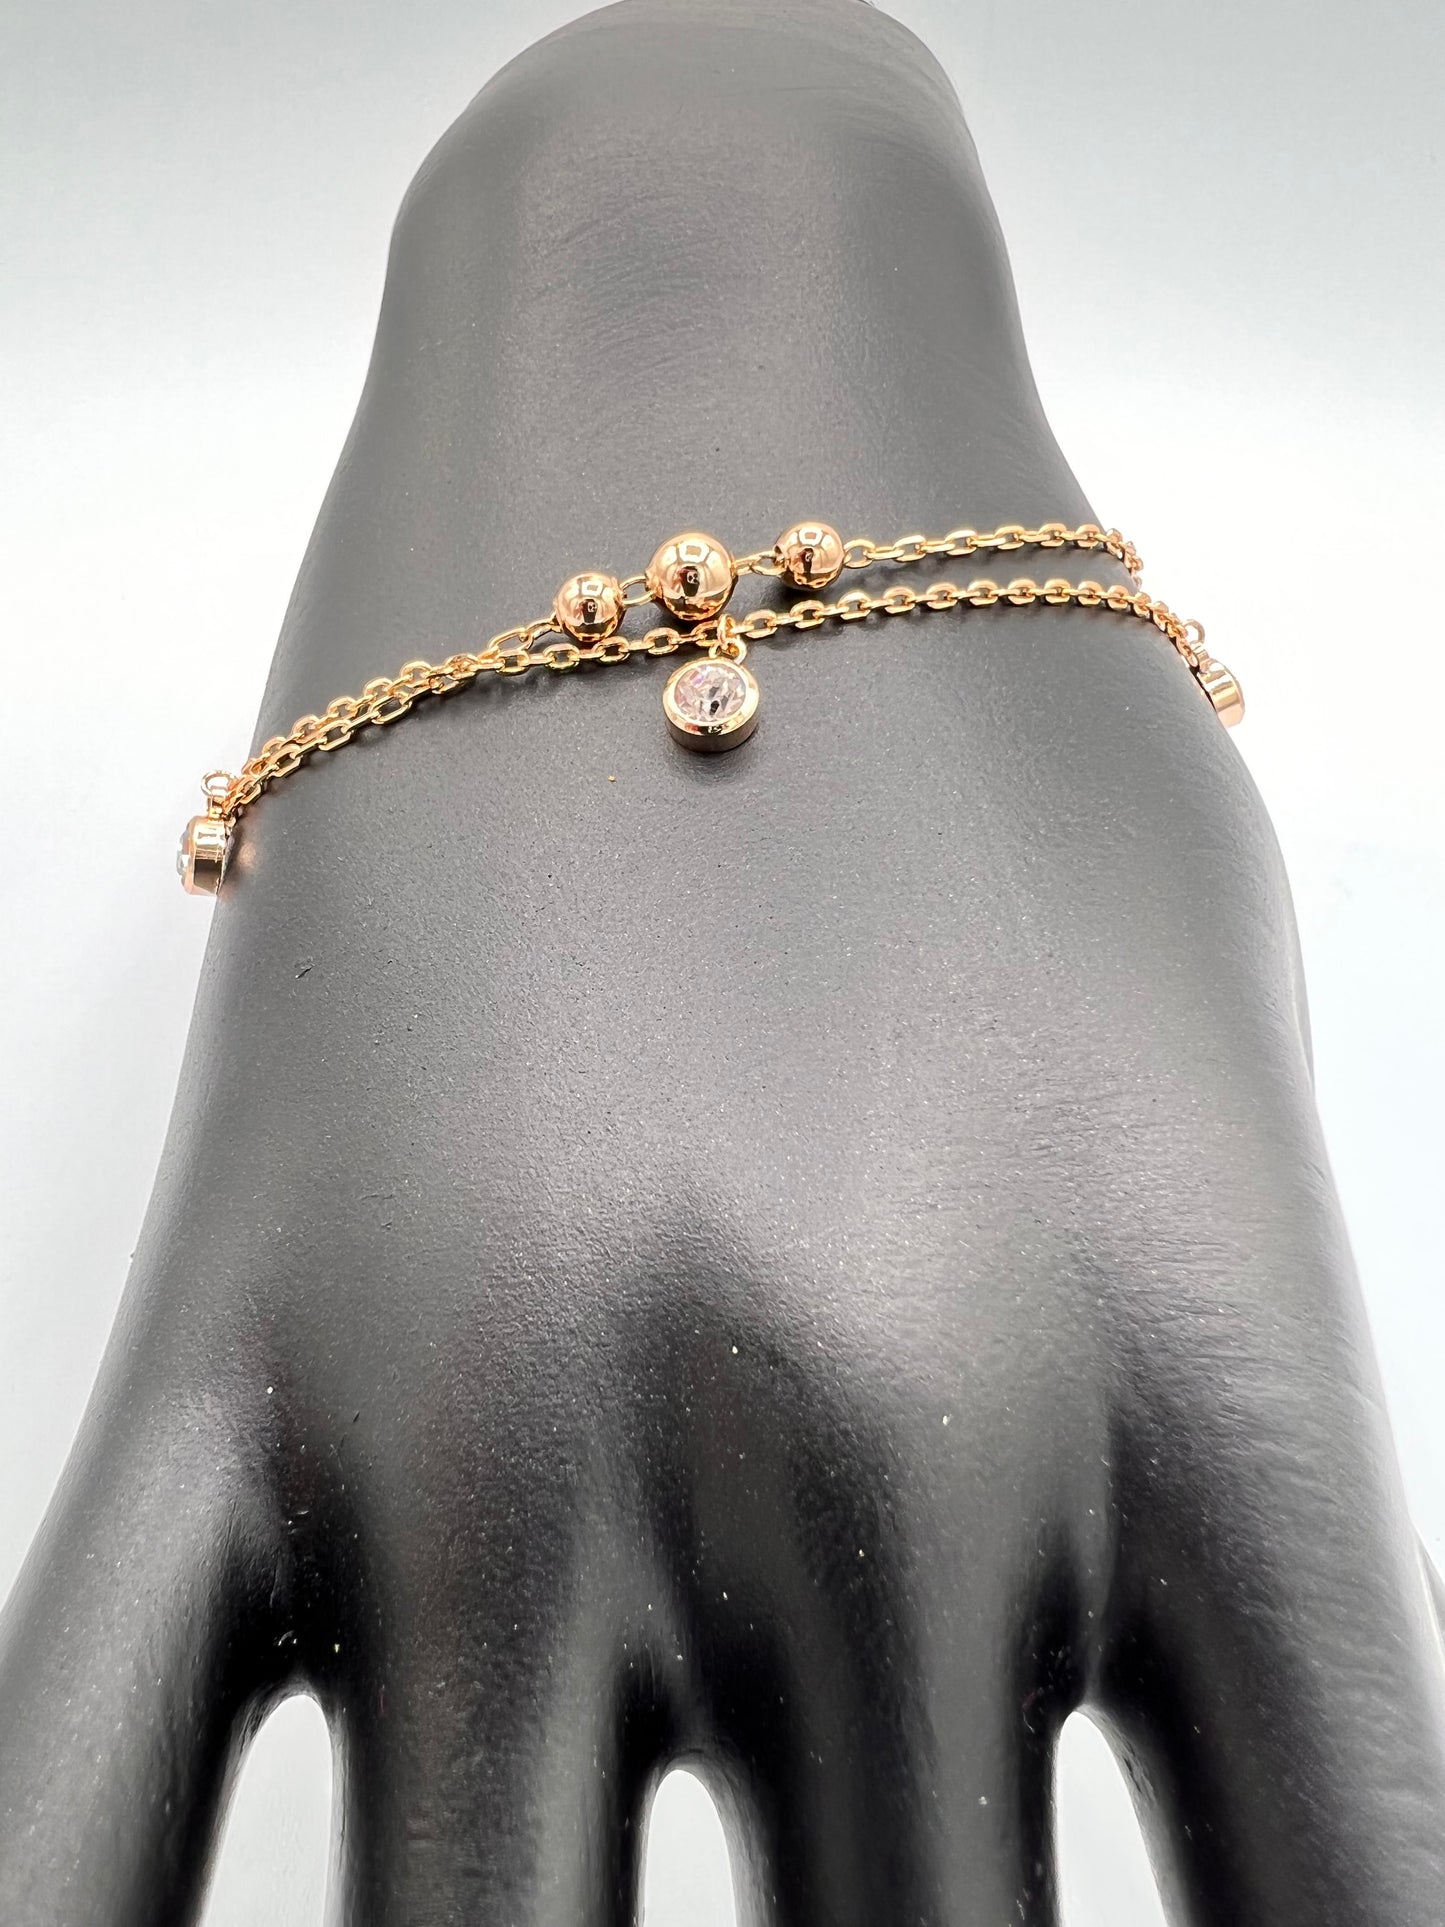 Delicate Double Chain Gold-Plated Bracelet - A Touch of Elegance for Every Occasion